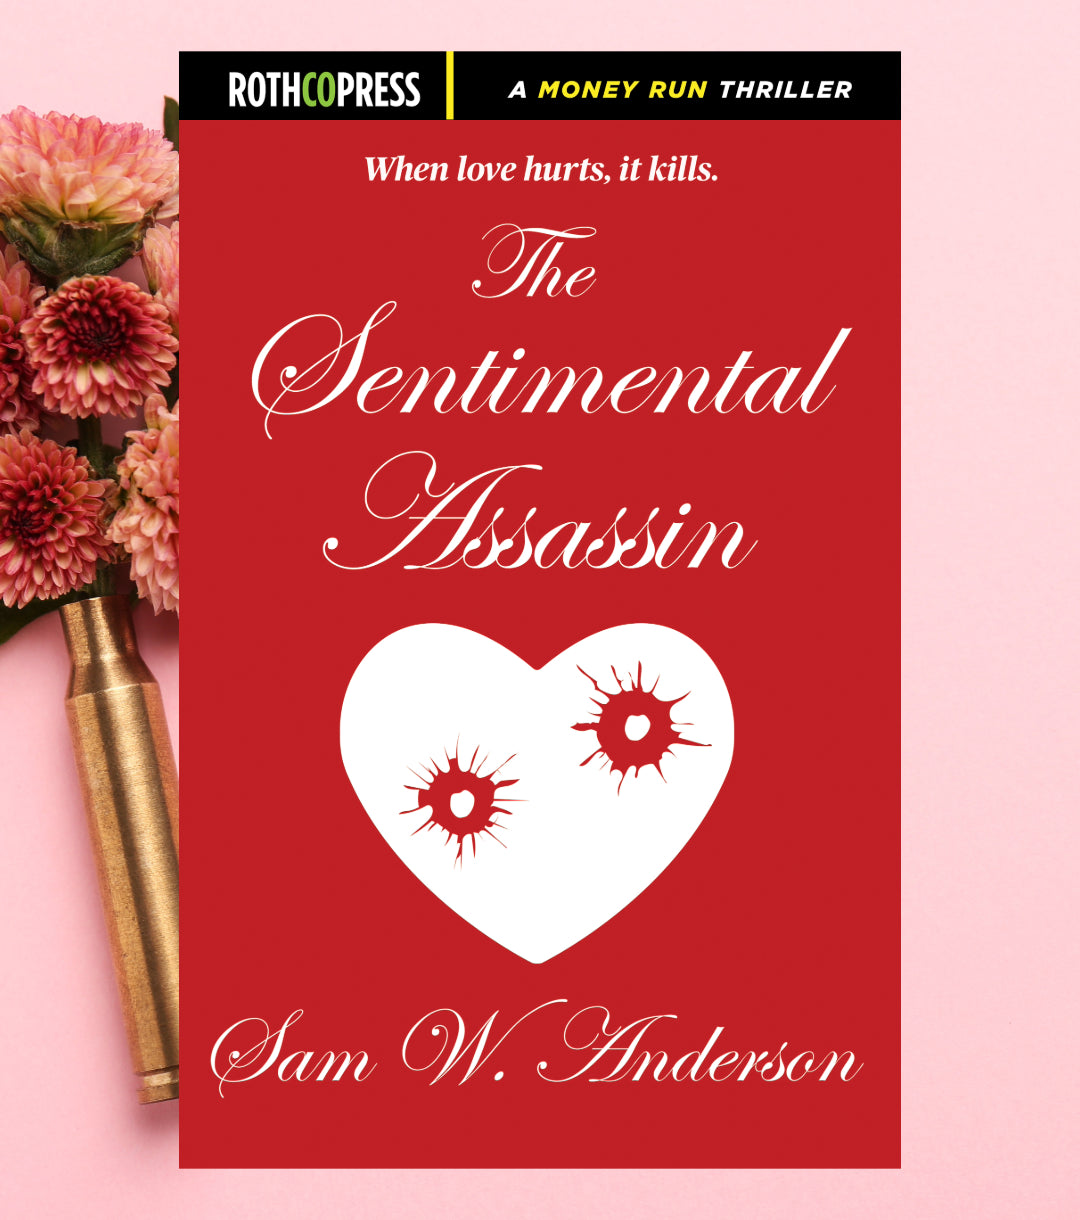 The Sentimental Assassin by Sam W. Anderson